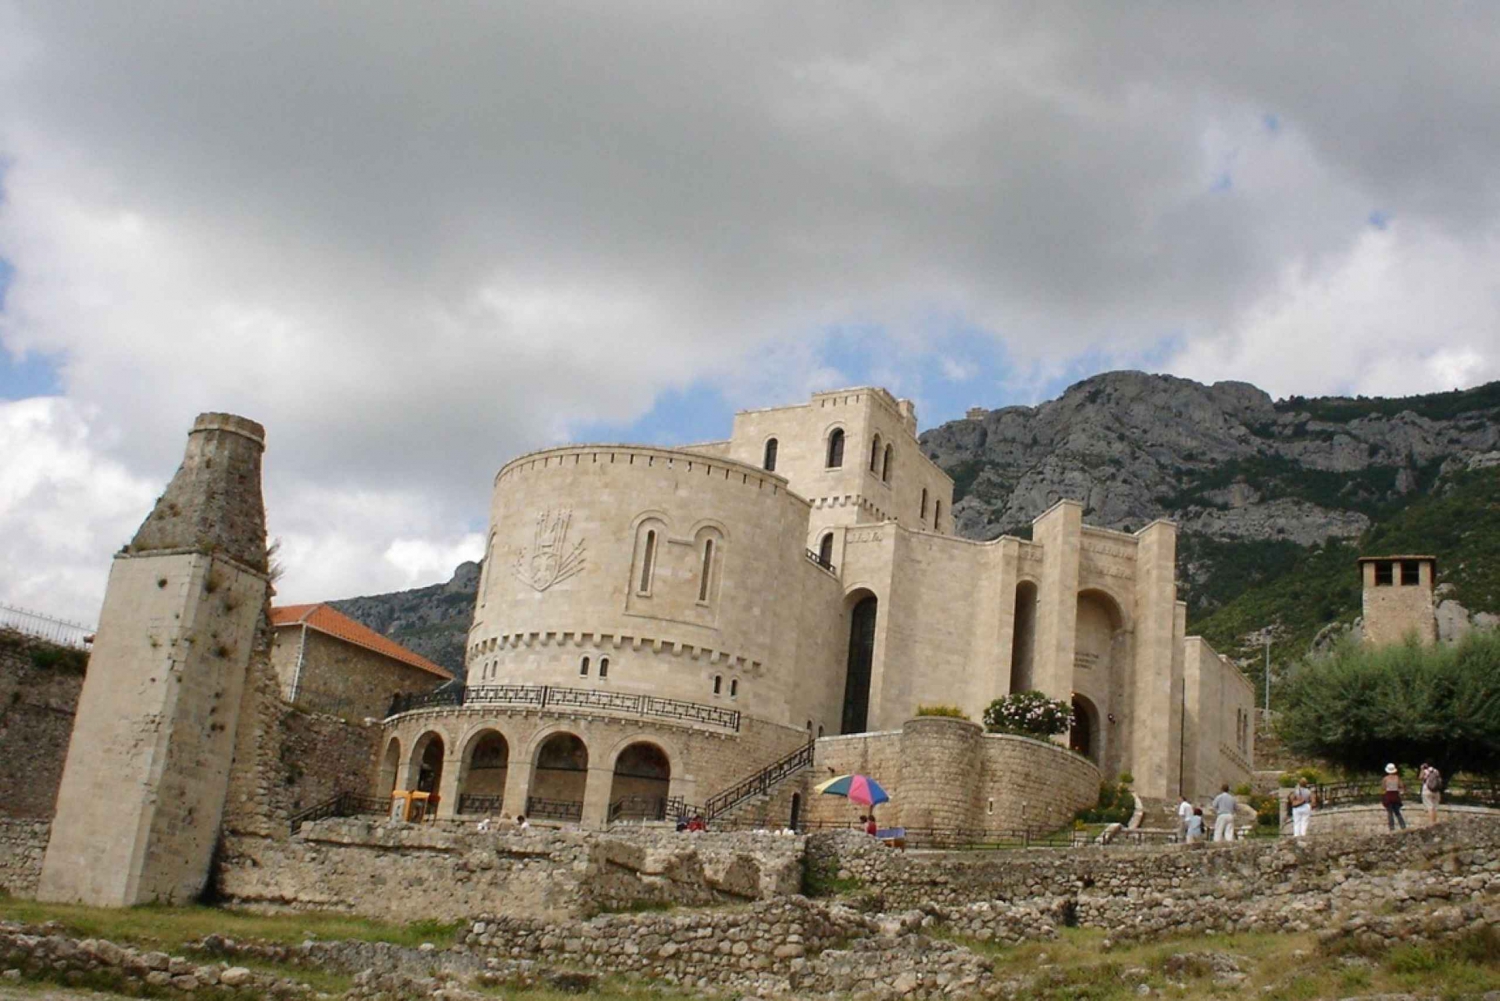 KRUJA MEDIEVAL TOWN DAY TRIP (Departure from Tirana)